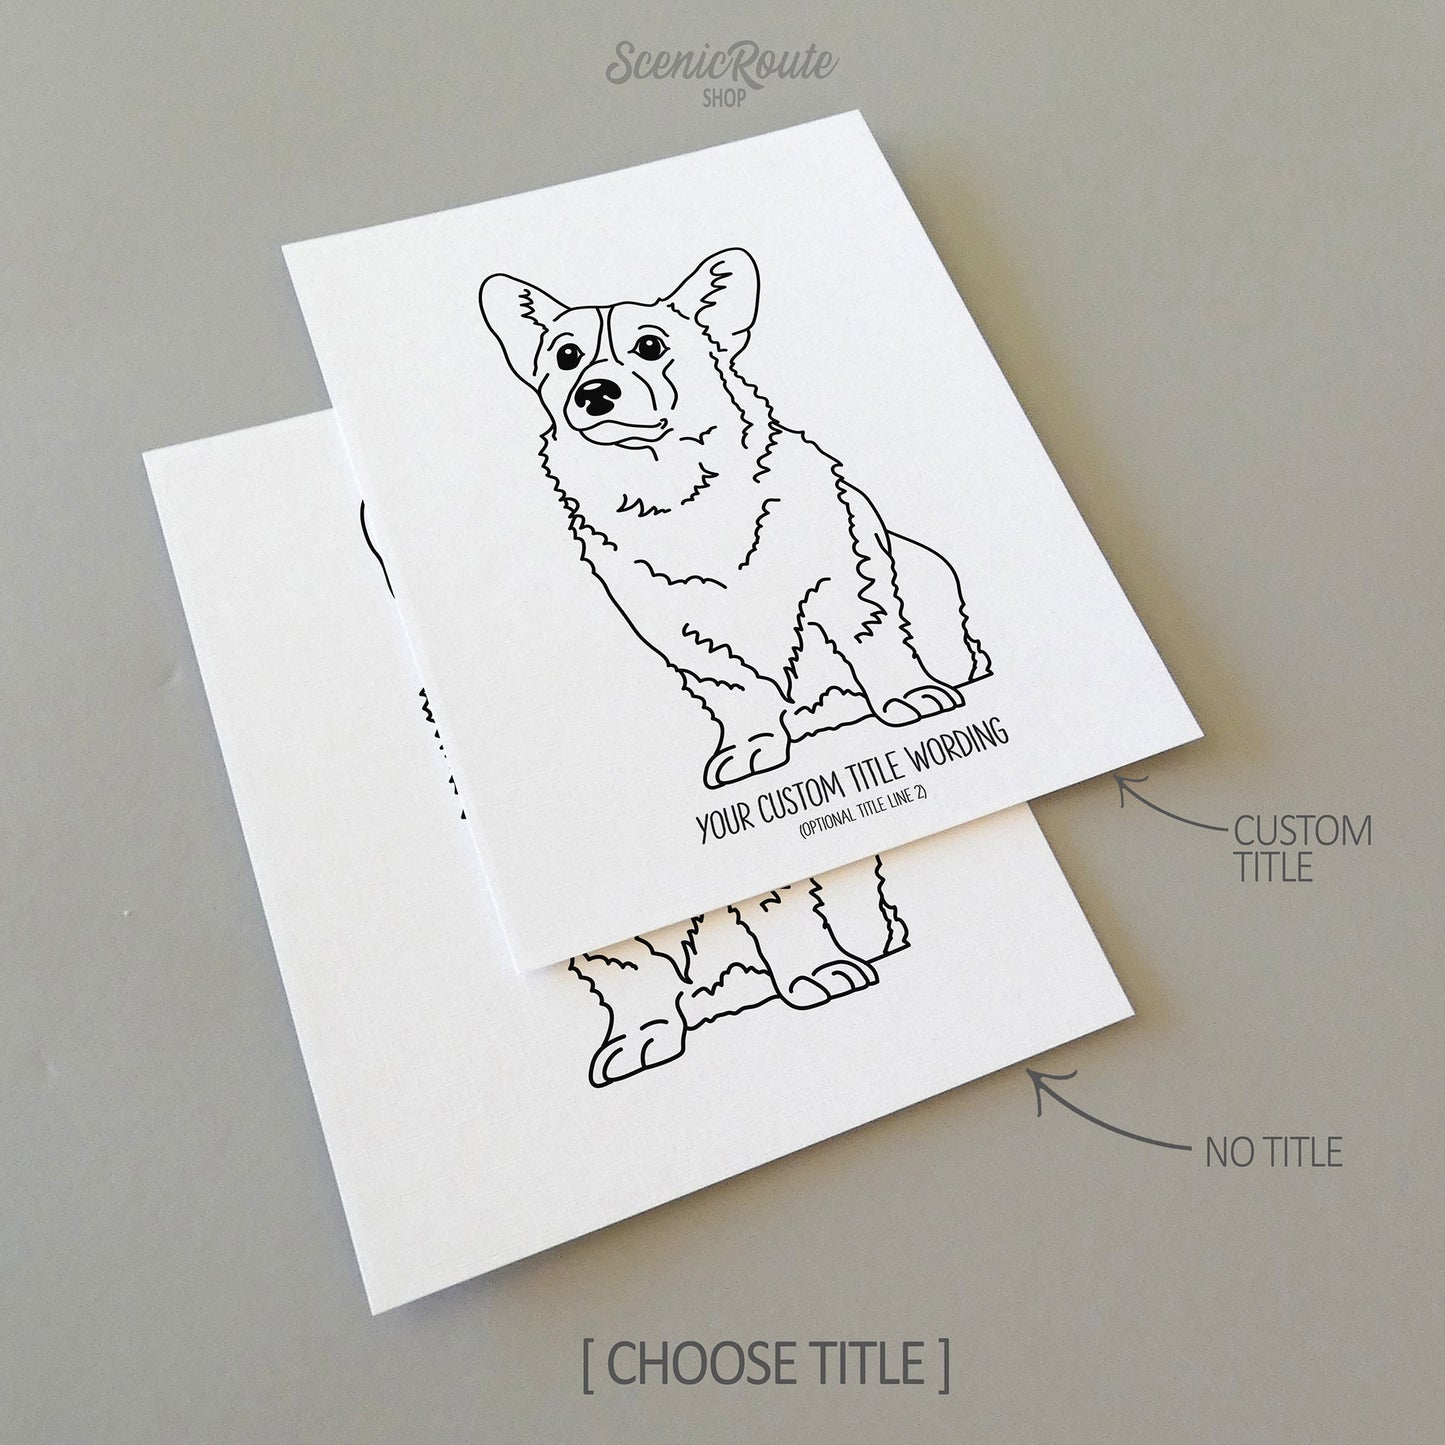 Two drawings of a Corgi dog on white linen paper with a gray background.  Pieces are shown with “No Title” and “Custom Title” options to illustrate the available art print options.